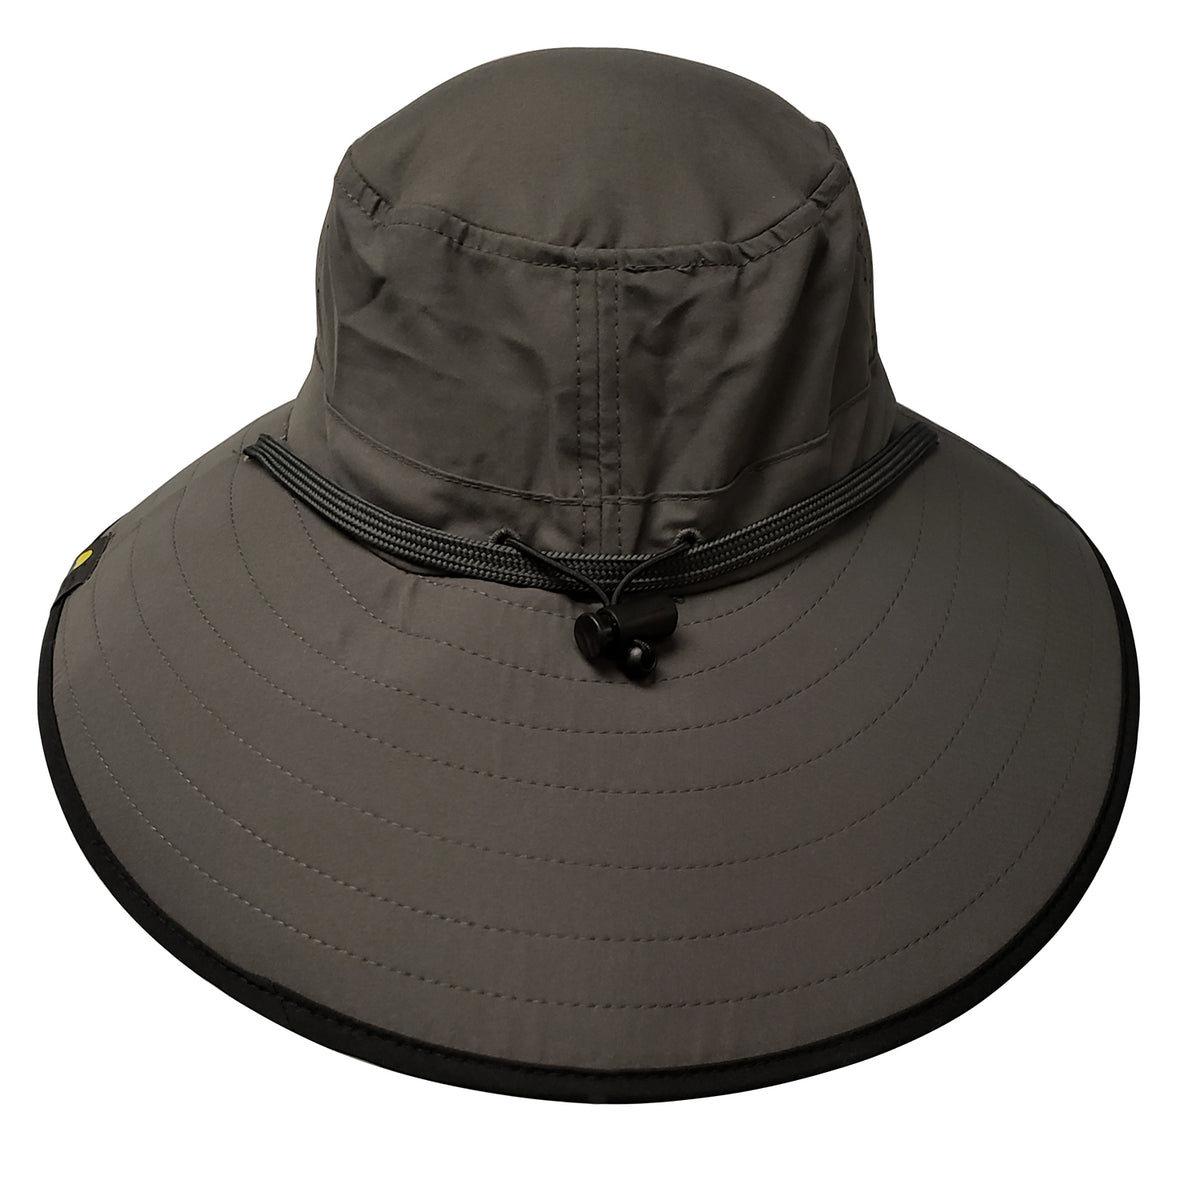 Adult Booney Hat - Charcoal with Black Trim – Sun Protection Zone